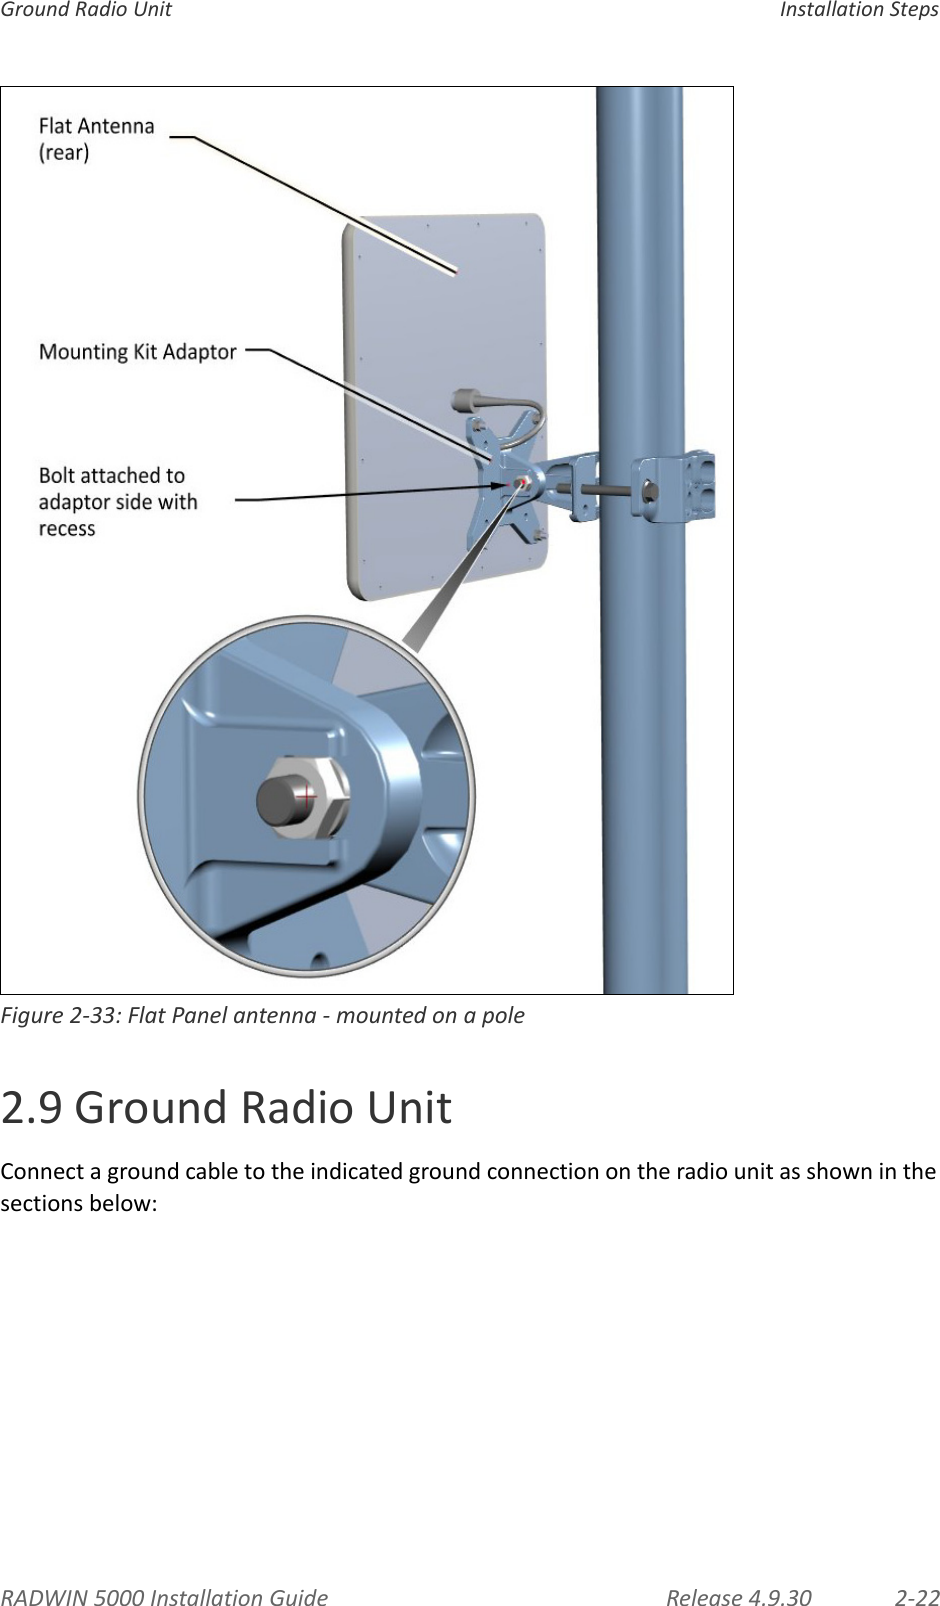 RADWIN5000InstallationGuide Release4.9.30 2‐22GroundRadioUnit InstallationStepsFigure2‐33:FlatPanelantenna‐mountedonapole2.9GroundRadioUnitConnectagroundcabletotheindicatedgroundconnectionontheradiounitasshowninthesectionsbelow: